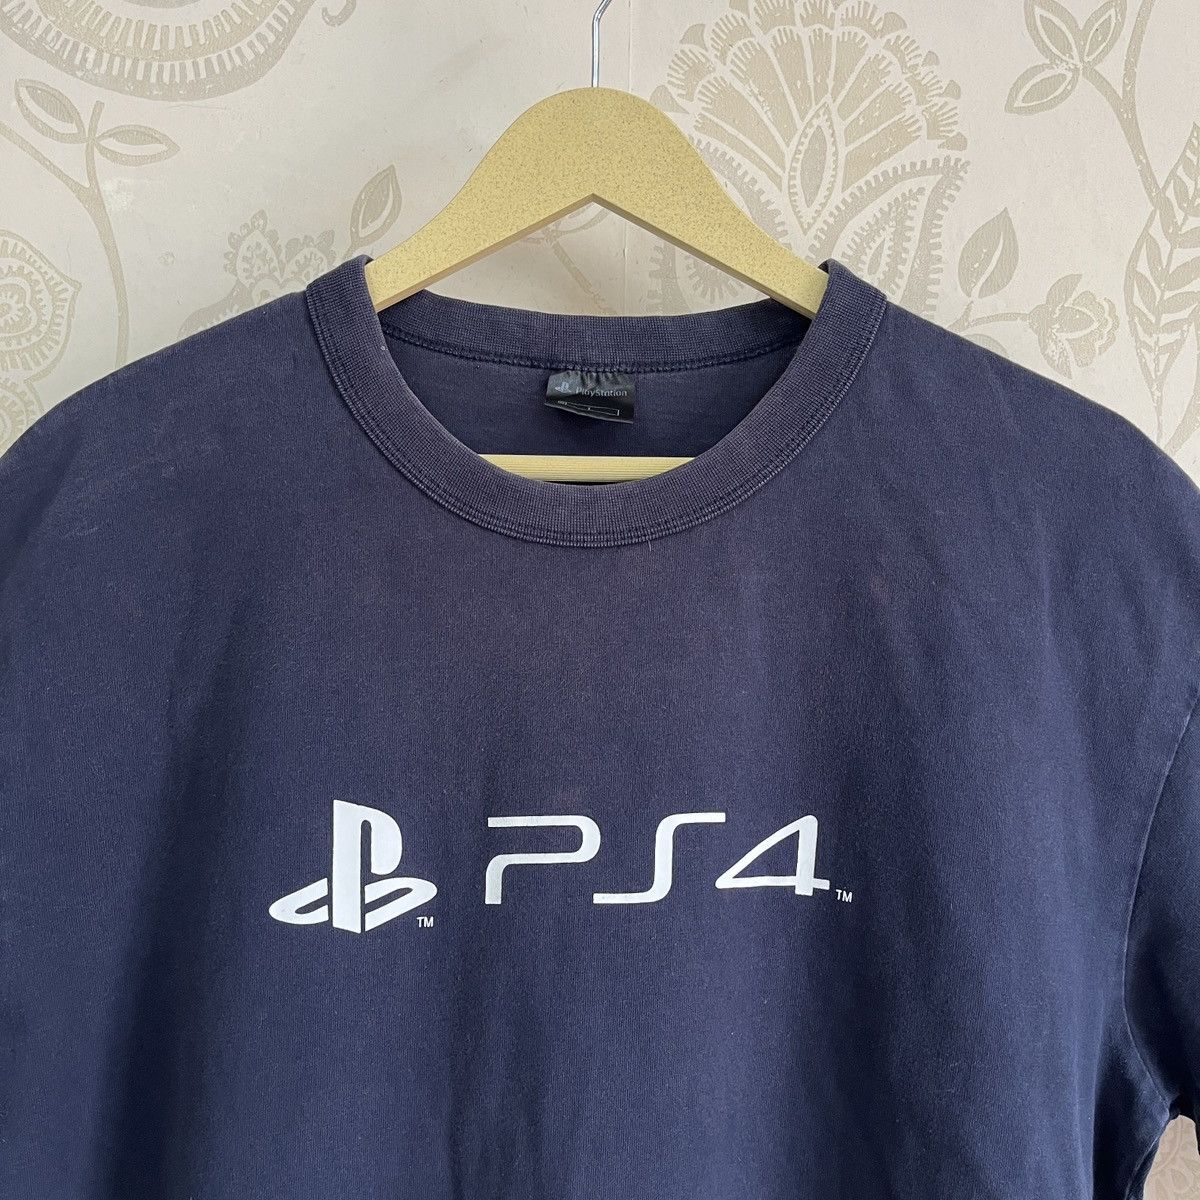 Playstation PS4 Promo TShirt Japan Official Licensed Product - 17